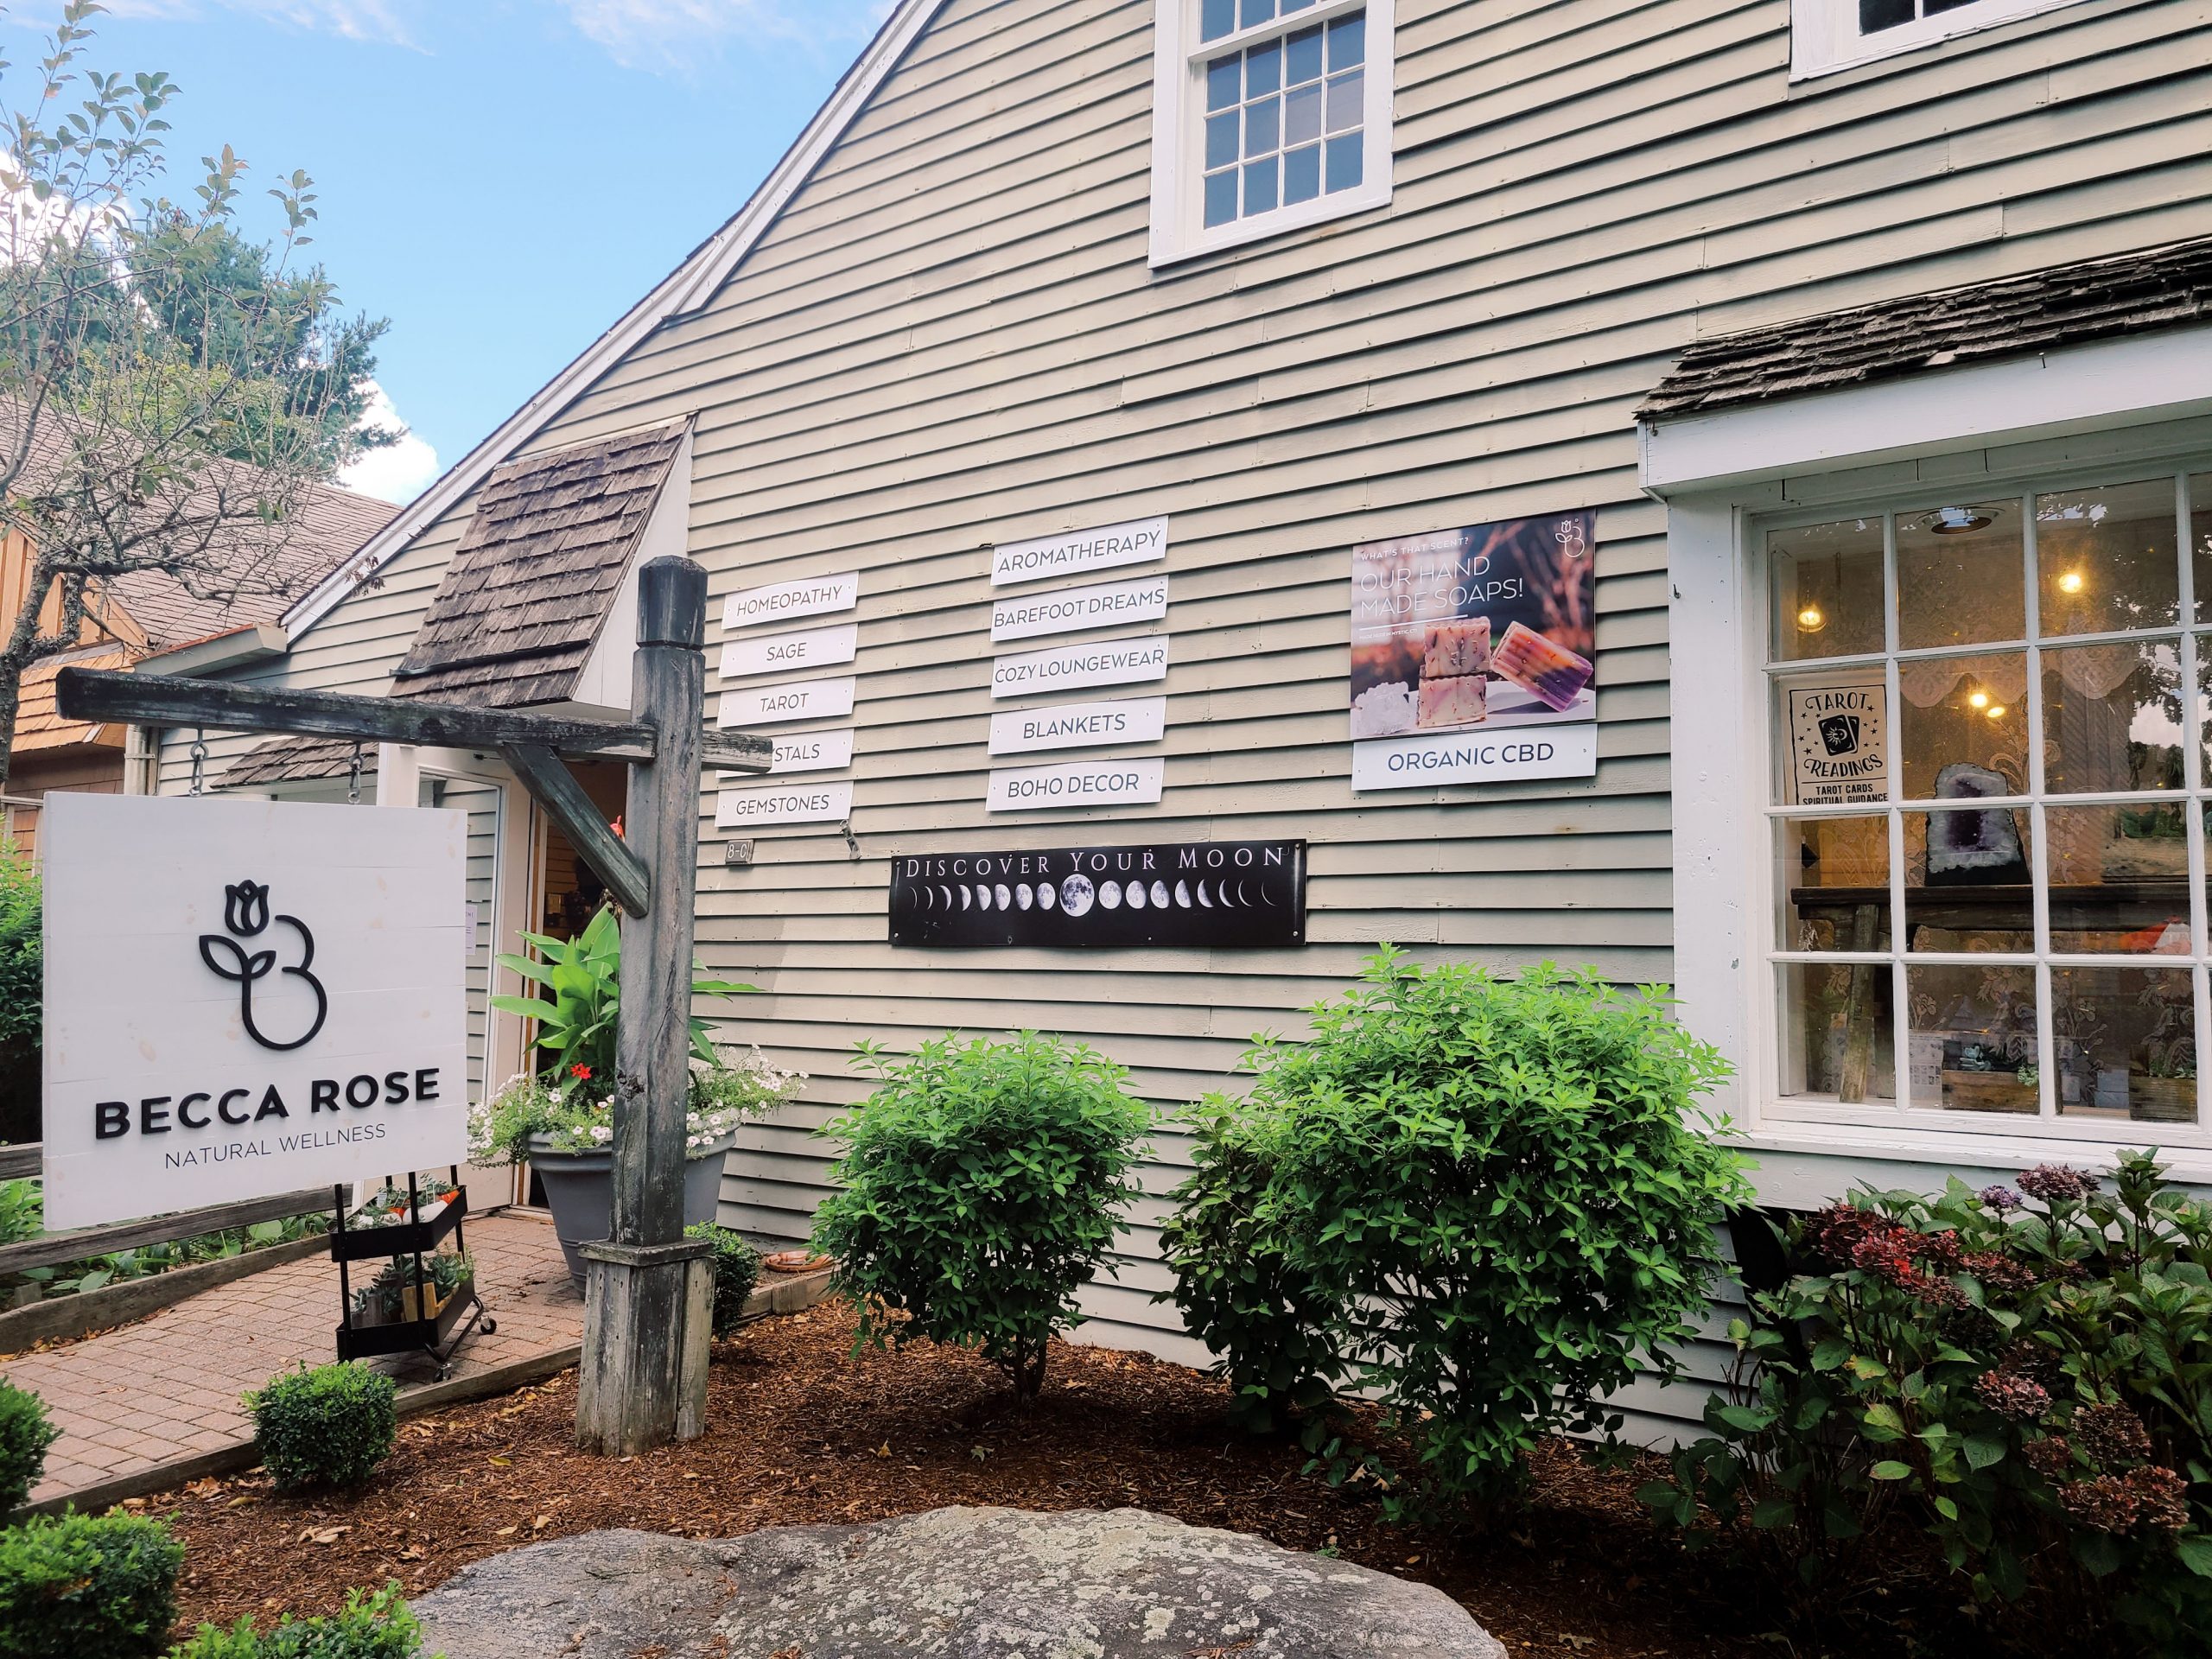 The exterior of a shop called "Becca Rose" in Mystic, Connecticut